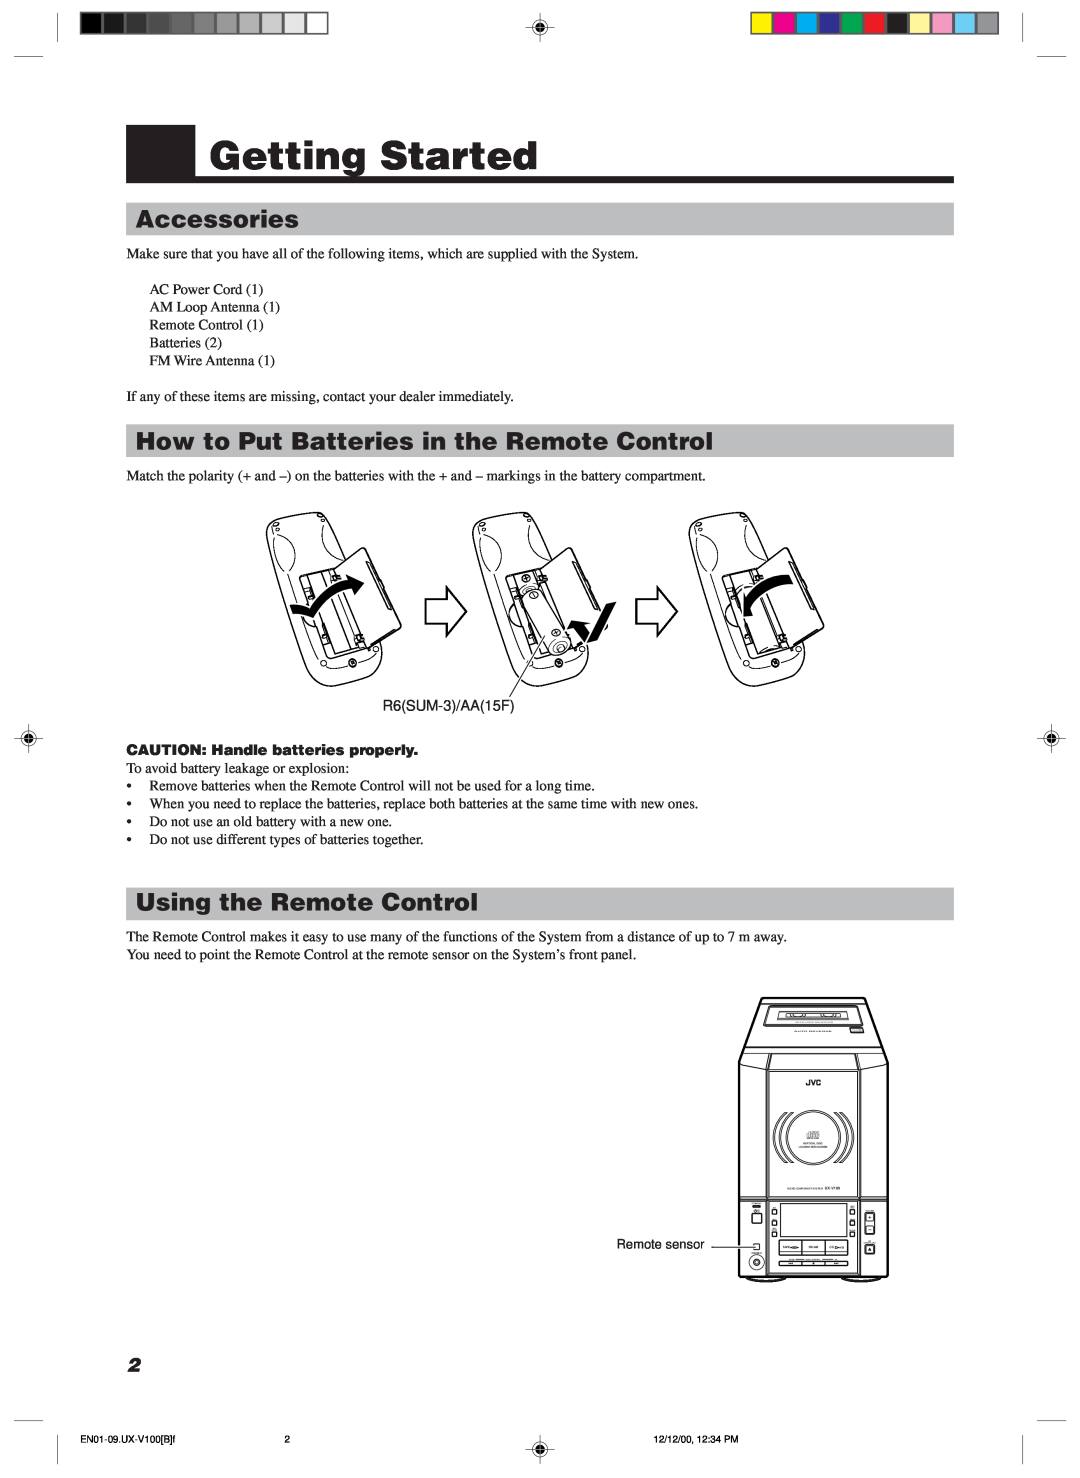 JVC 20981IEN manual Getting Started, Accessories, How to Put Batteries in the Remote Control, Using the Remote Control 